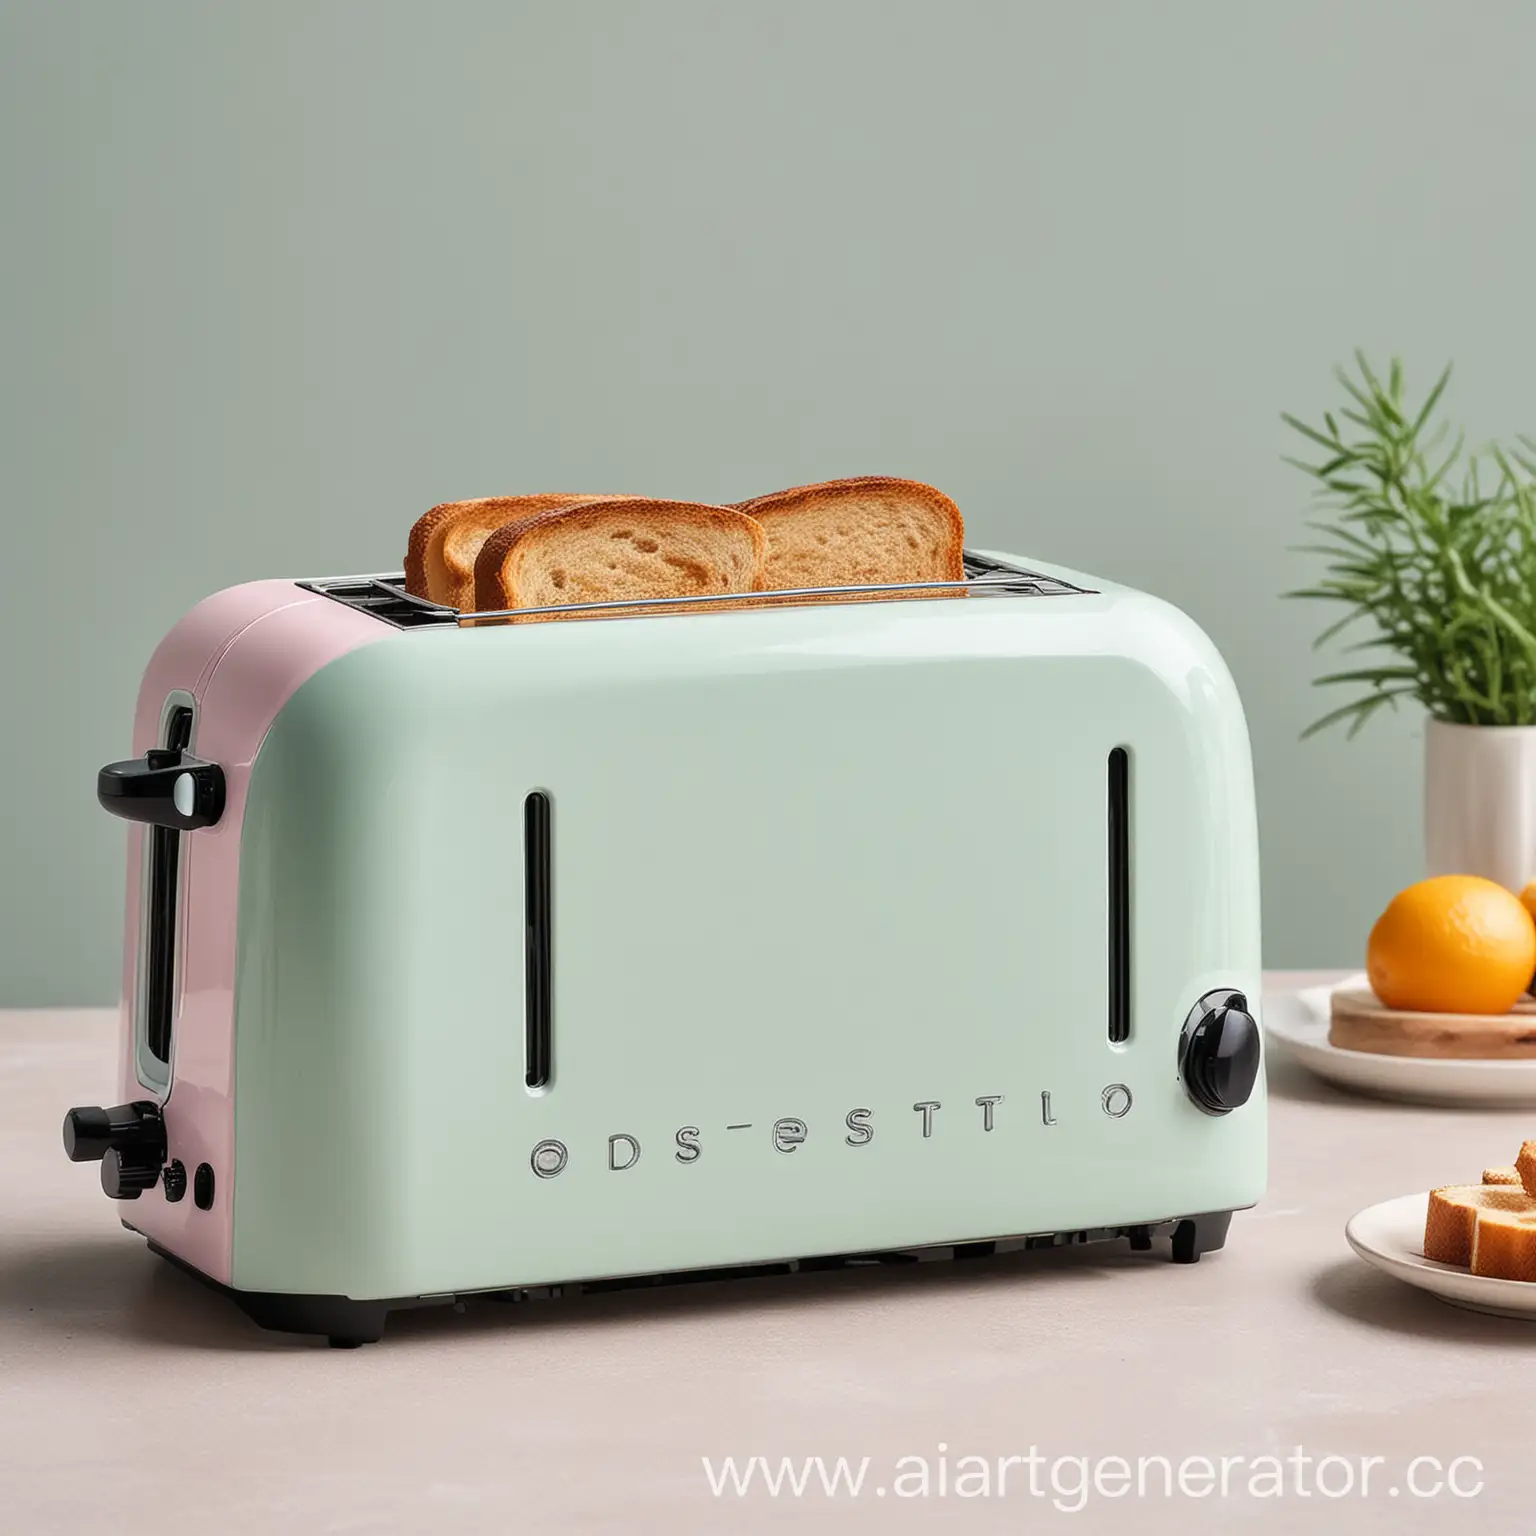 Eclectic-Style-Pastel-Toaster-Retro-Appliance-with-Soft-Color-Palette